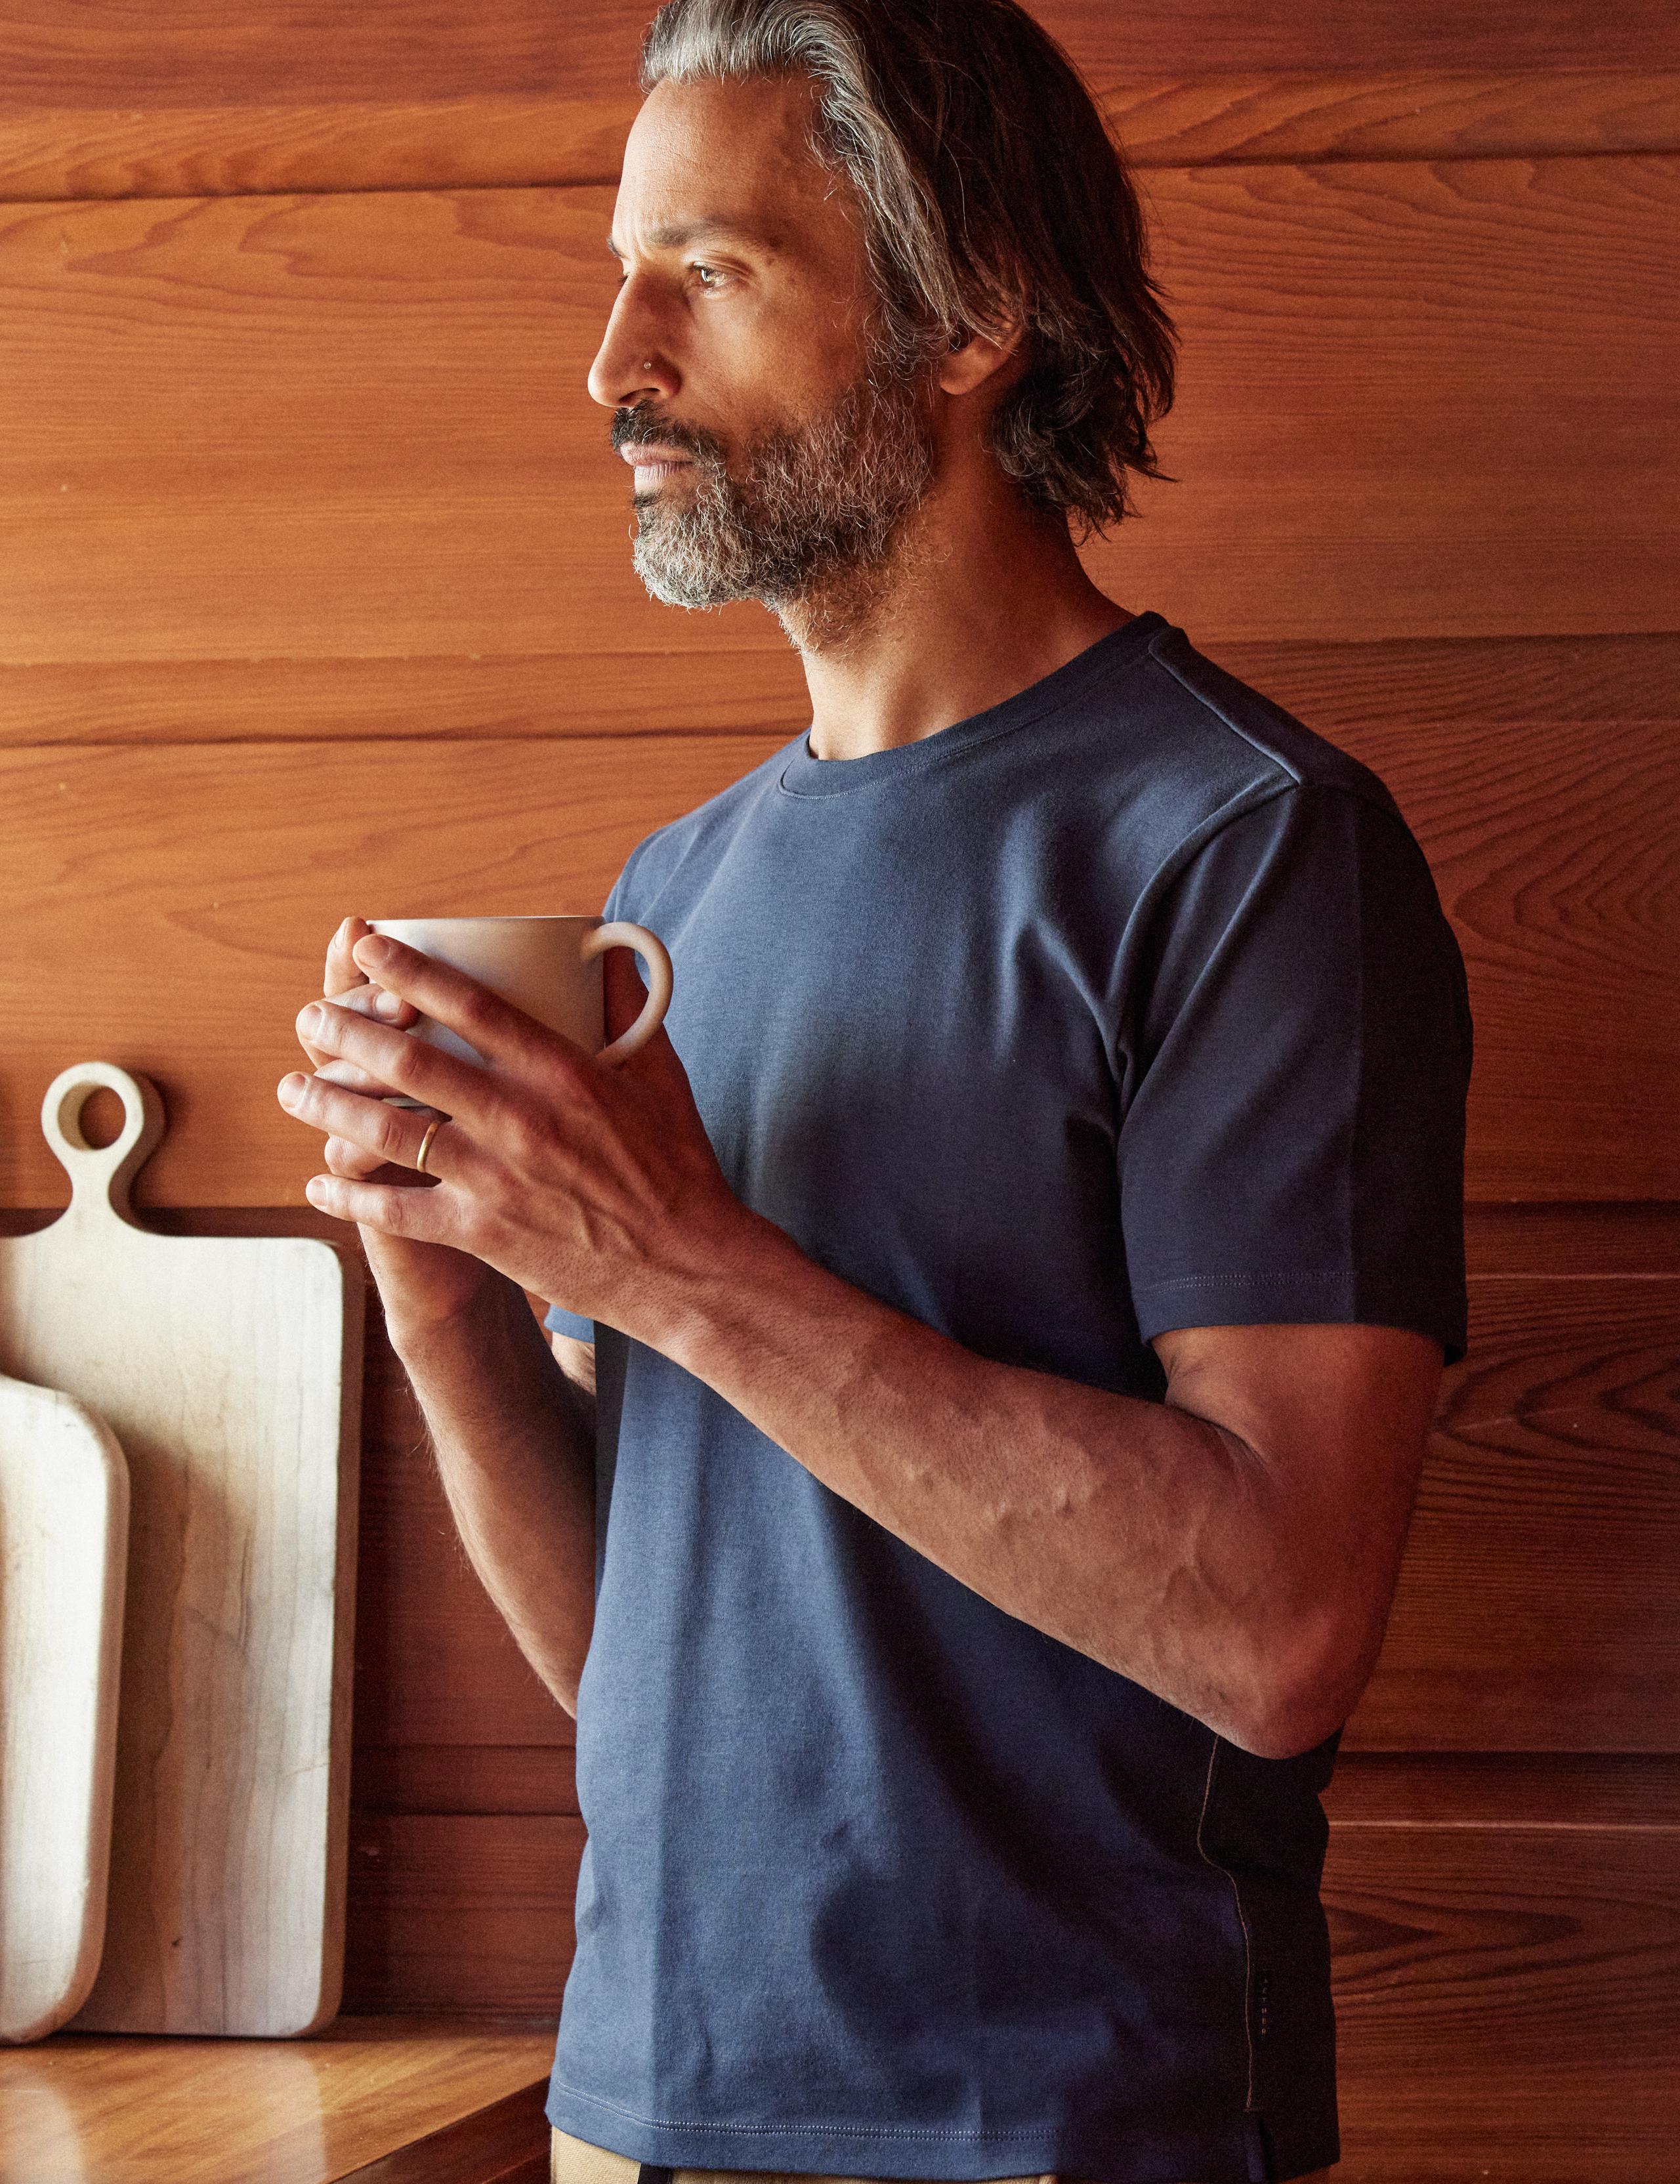 Man holding cup of coffee inside wood paneled mid-century home